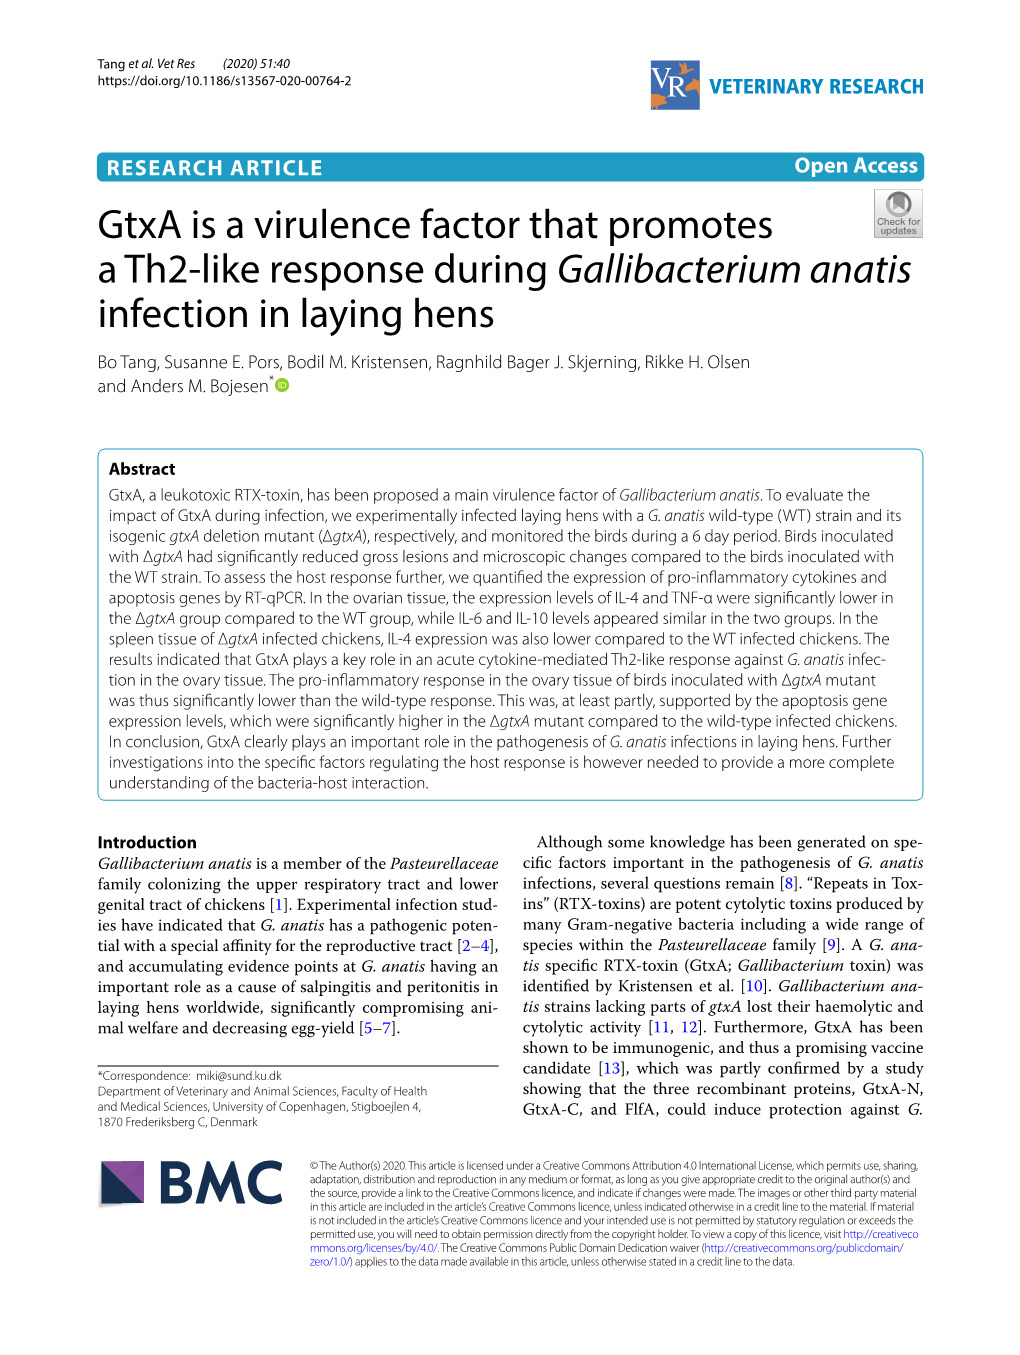 Gtxa Is a Virulence Factor That Promotes a Th2-Like Response